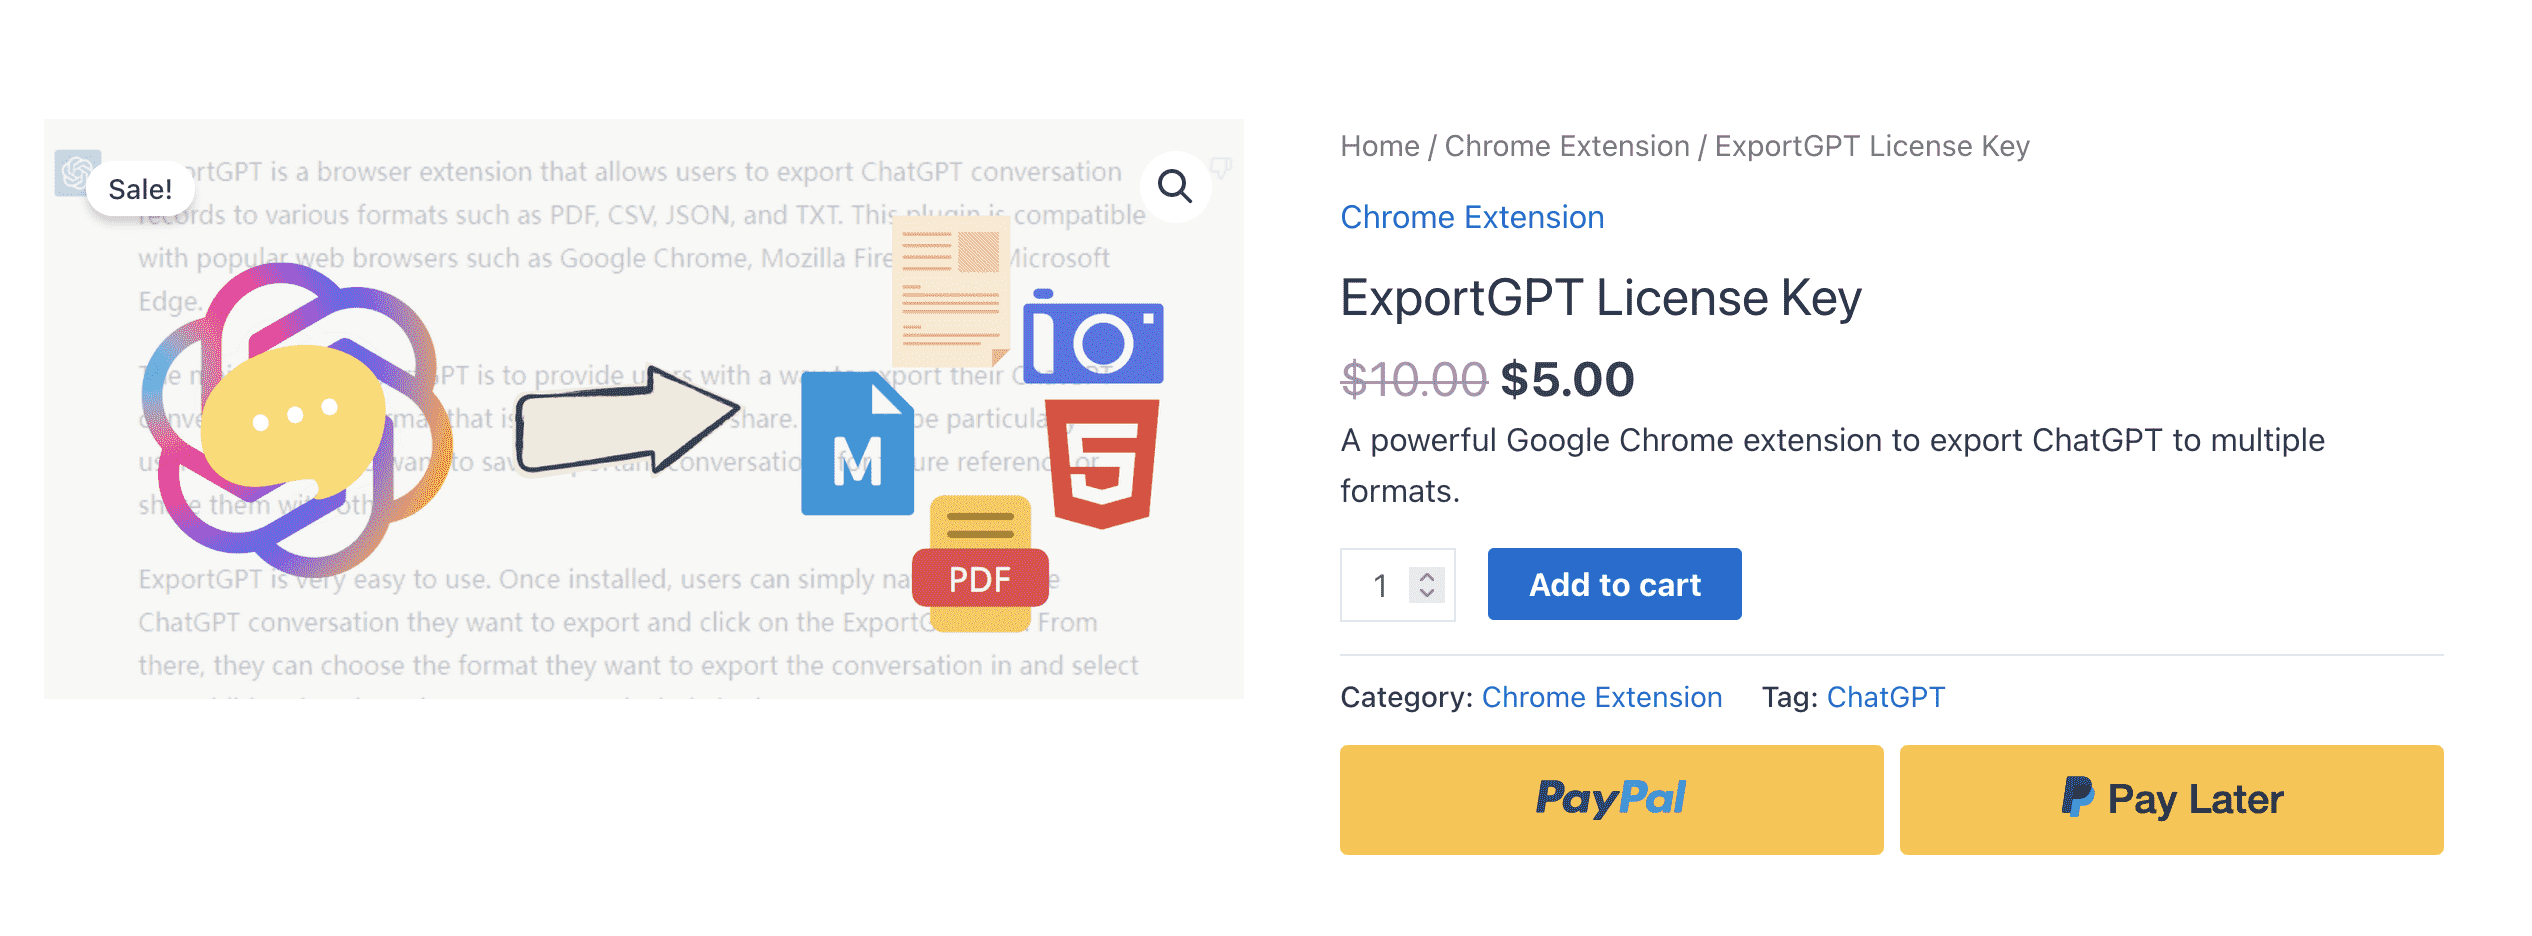 WooCommerce purchase ExportGPT License Key